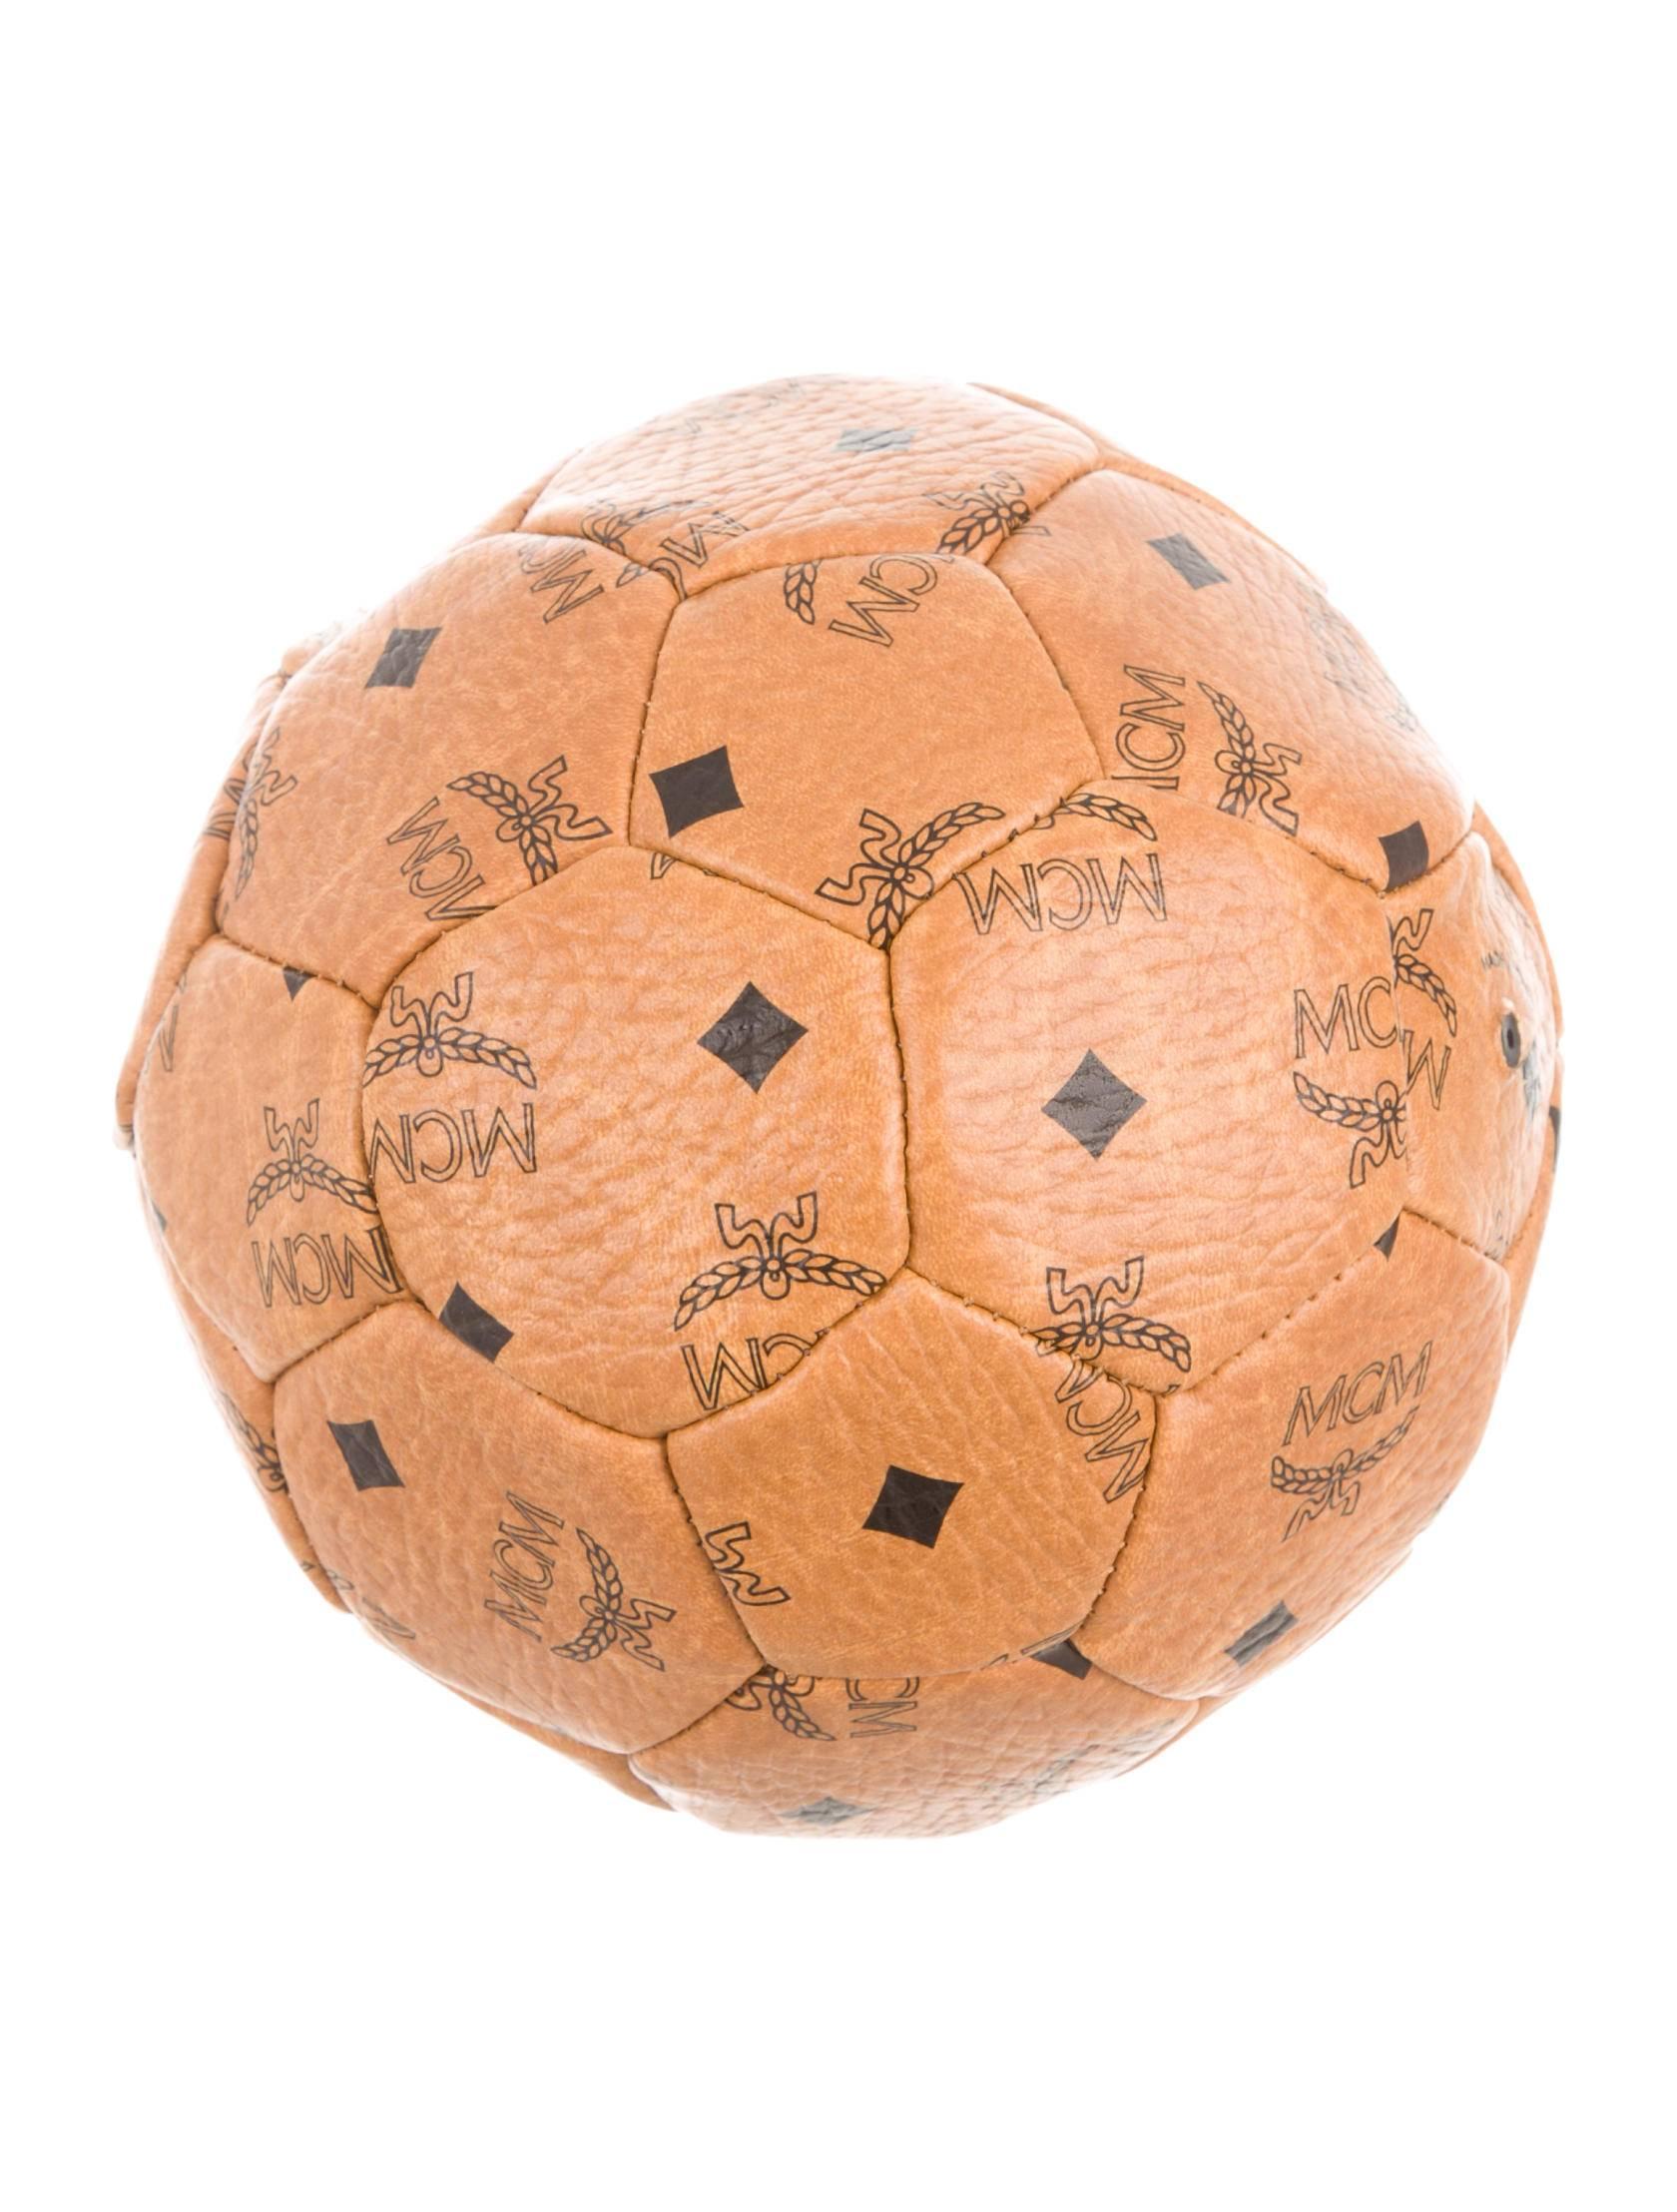 CURATOR'S NOTES

For the kid (big or small), who has everything: Rare FIFA World Cup collector's MCM leather soccer ball.

Leather
From 2014 FIFA World Cup 
Circumference 21.5